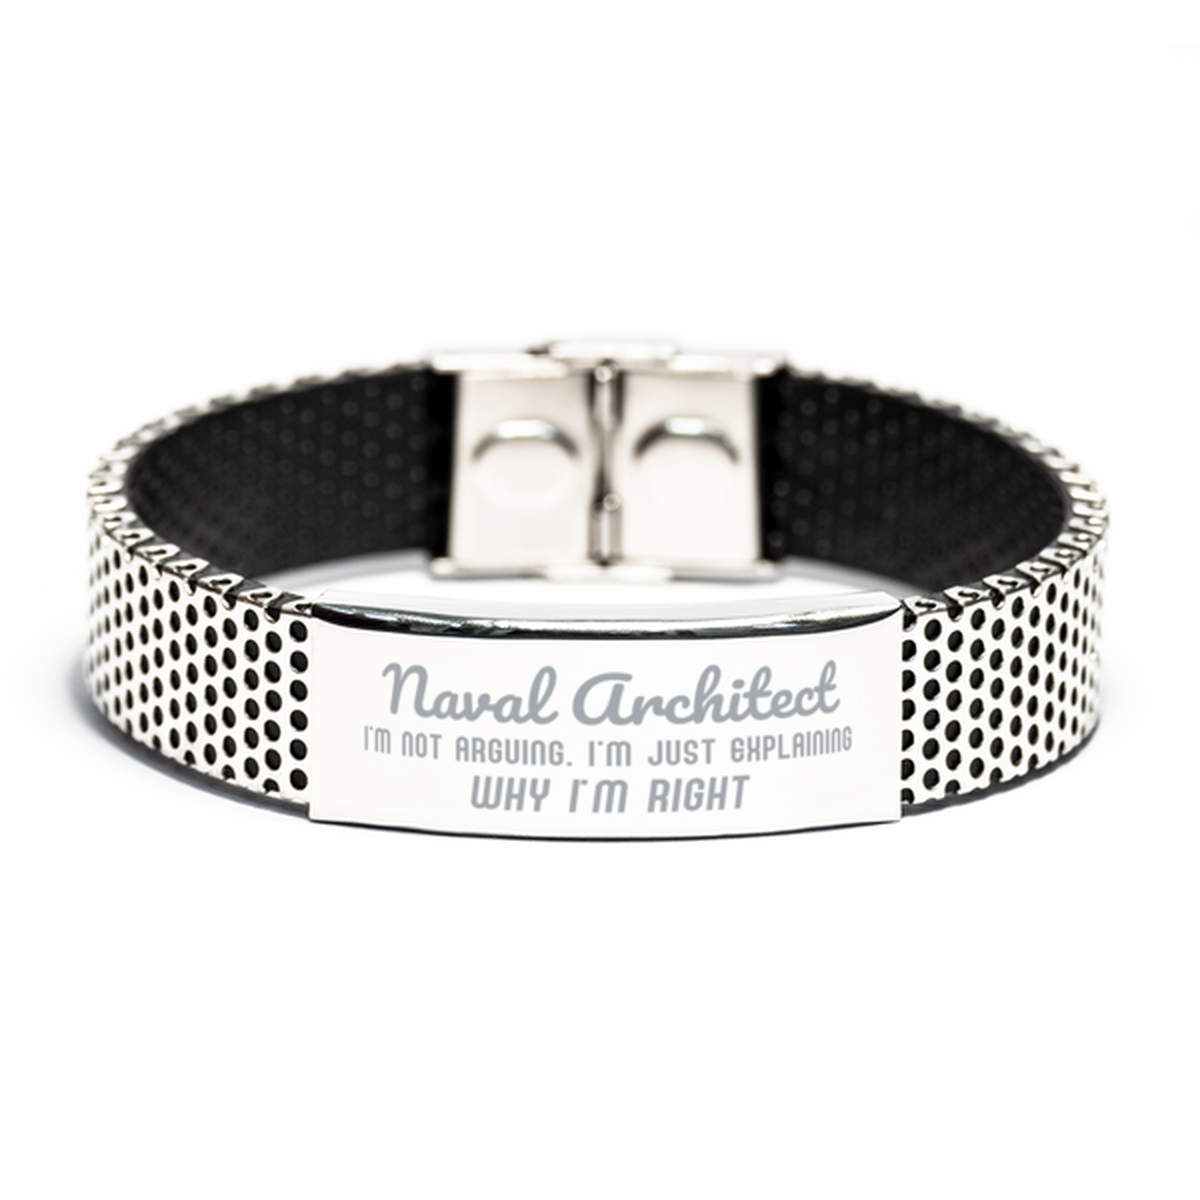 Naval Architect I'm not Arguing. I'm Just Explaining Why I'm RIGHT Stainless Steel Bracelet, Funny Saying Quote Naval Architect Gifts For Naval Architect Graduation Birthday Christmas Gifts for Men Women Coworker